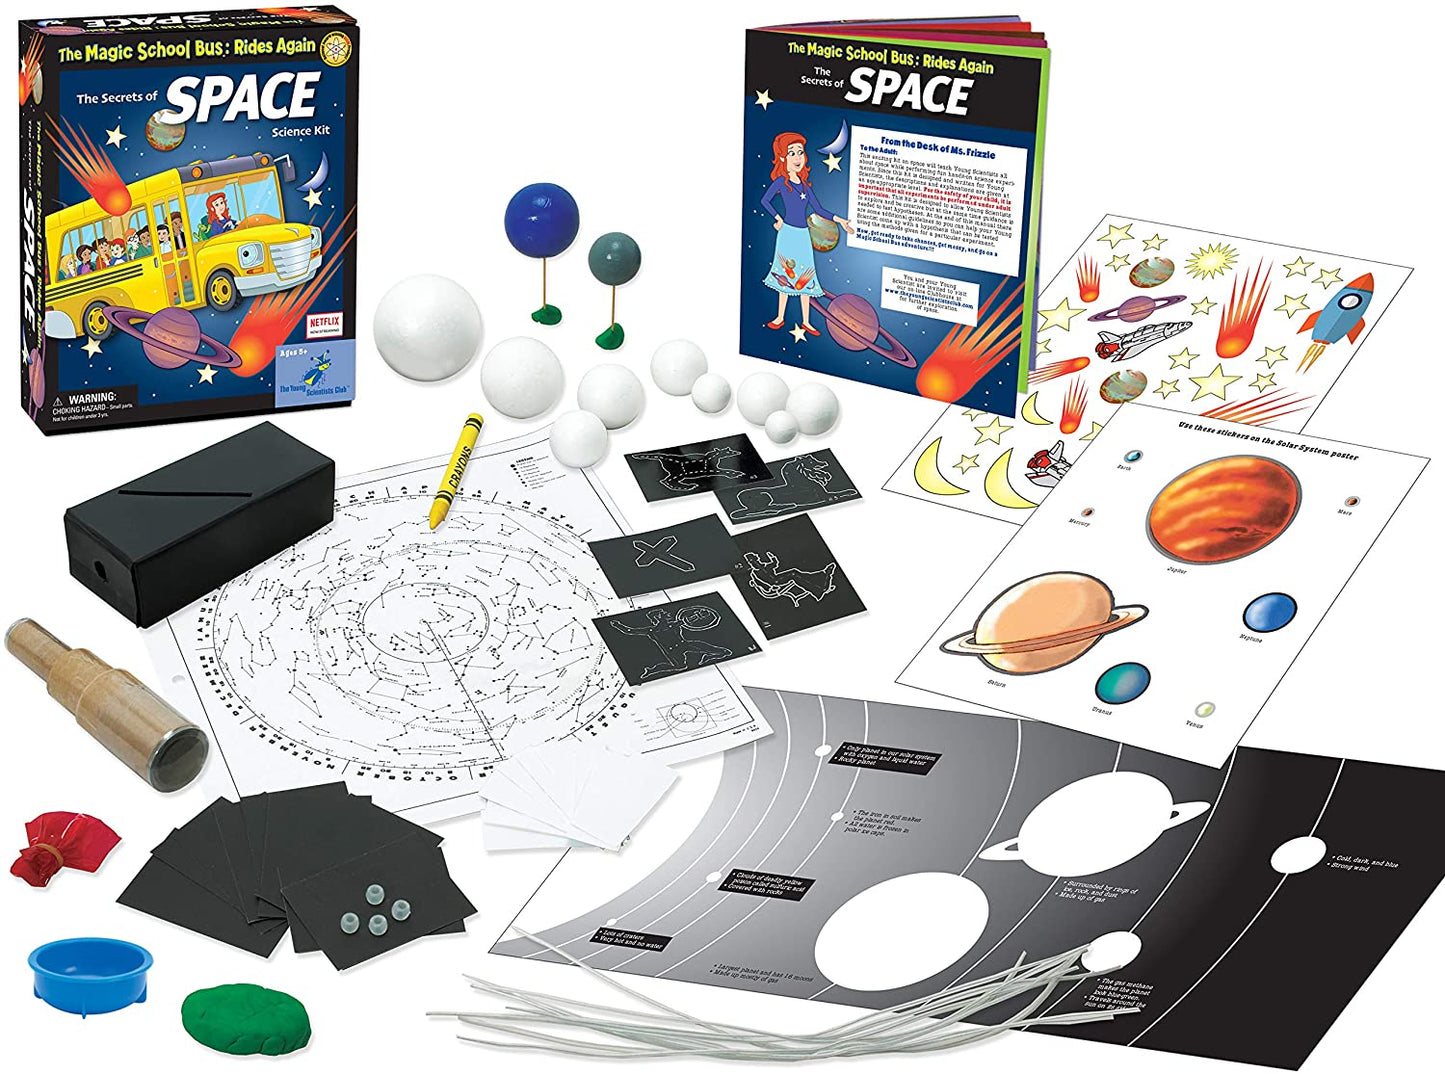 The Secrets of Space Science Kit